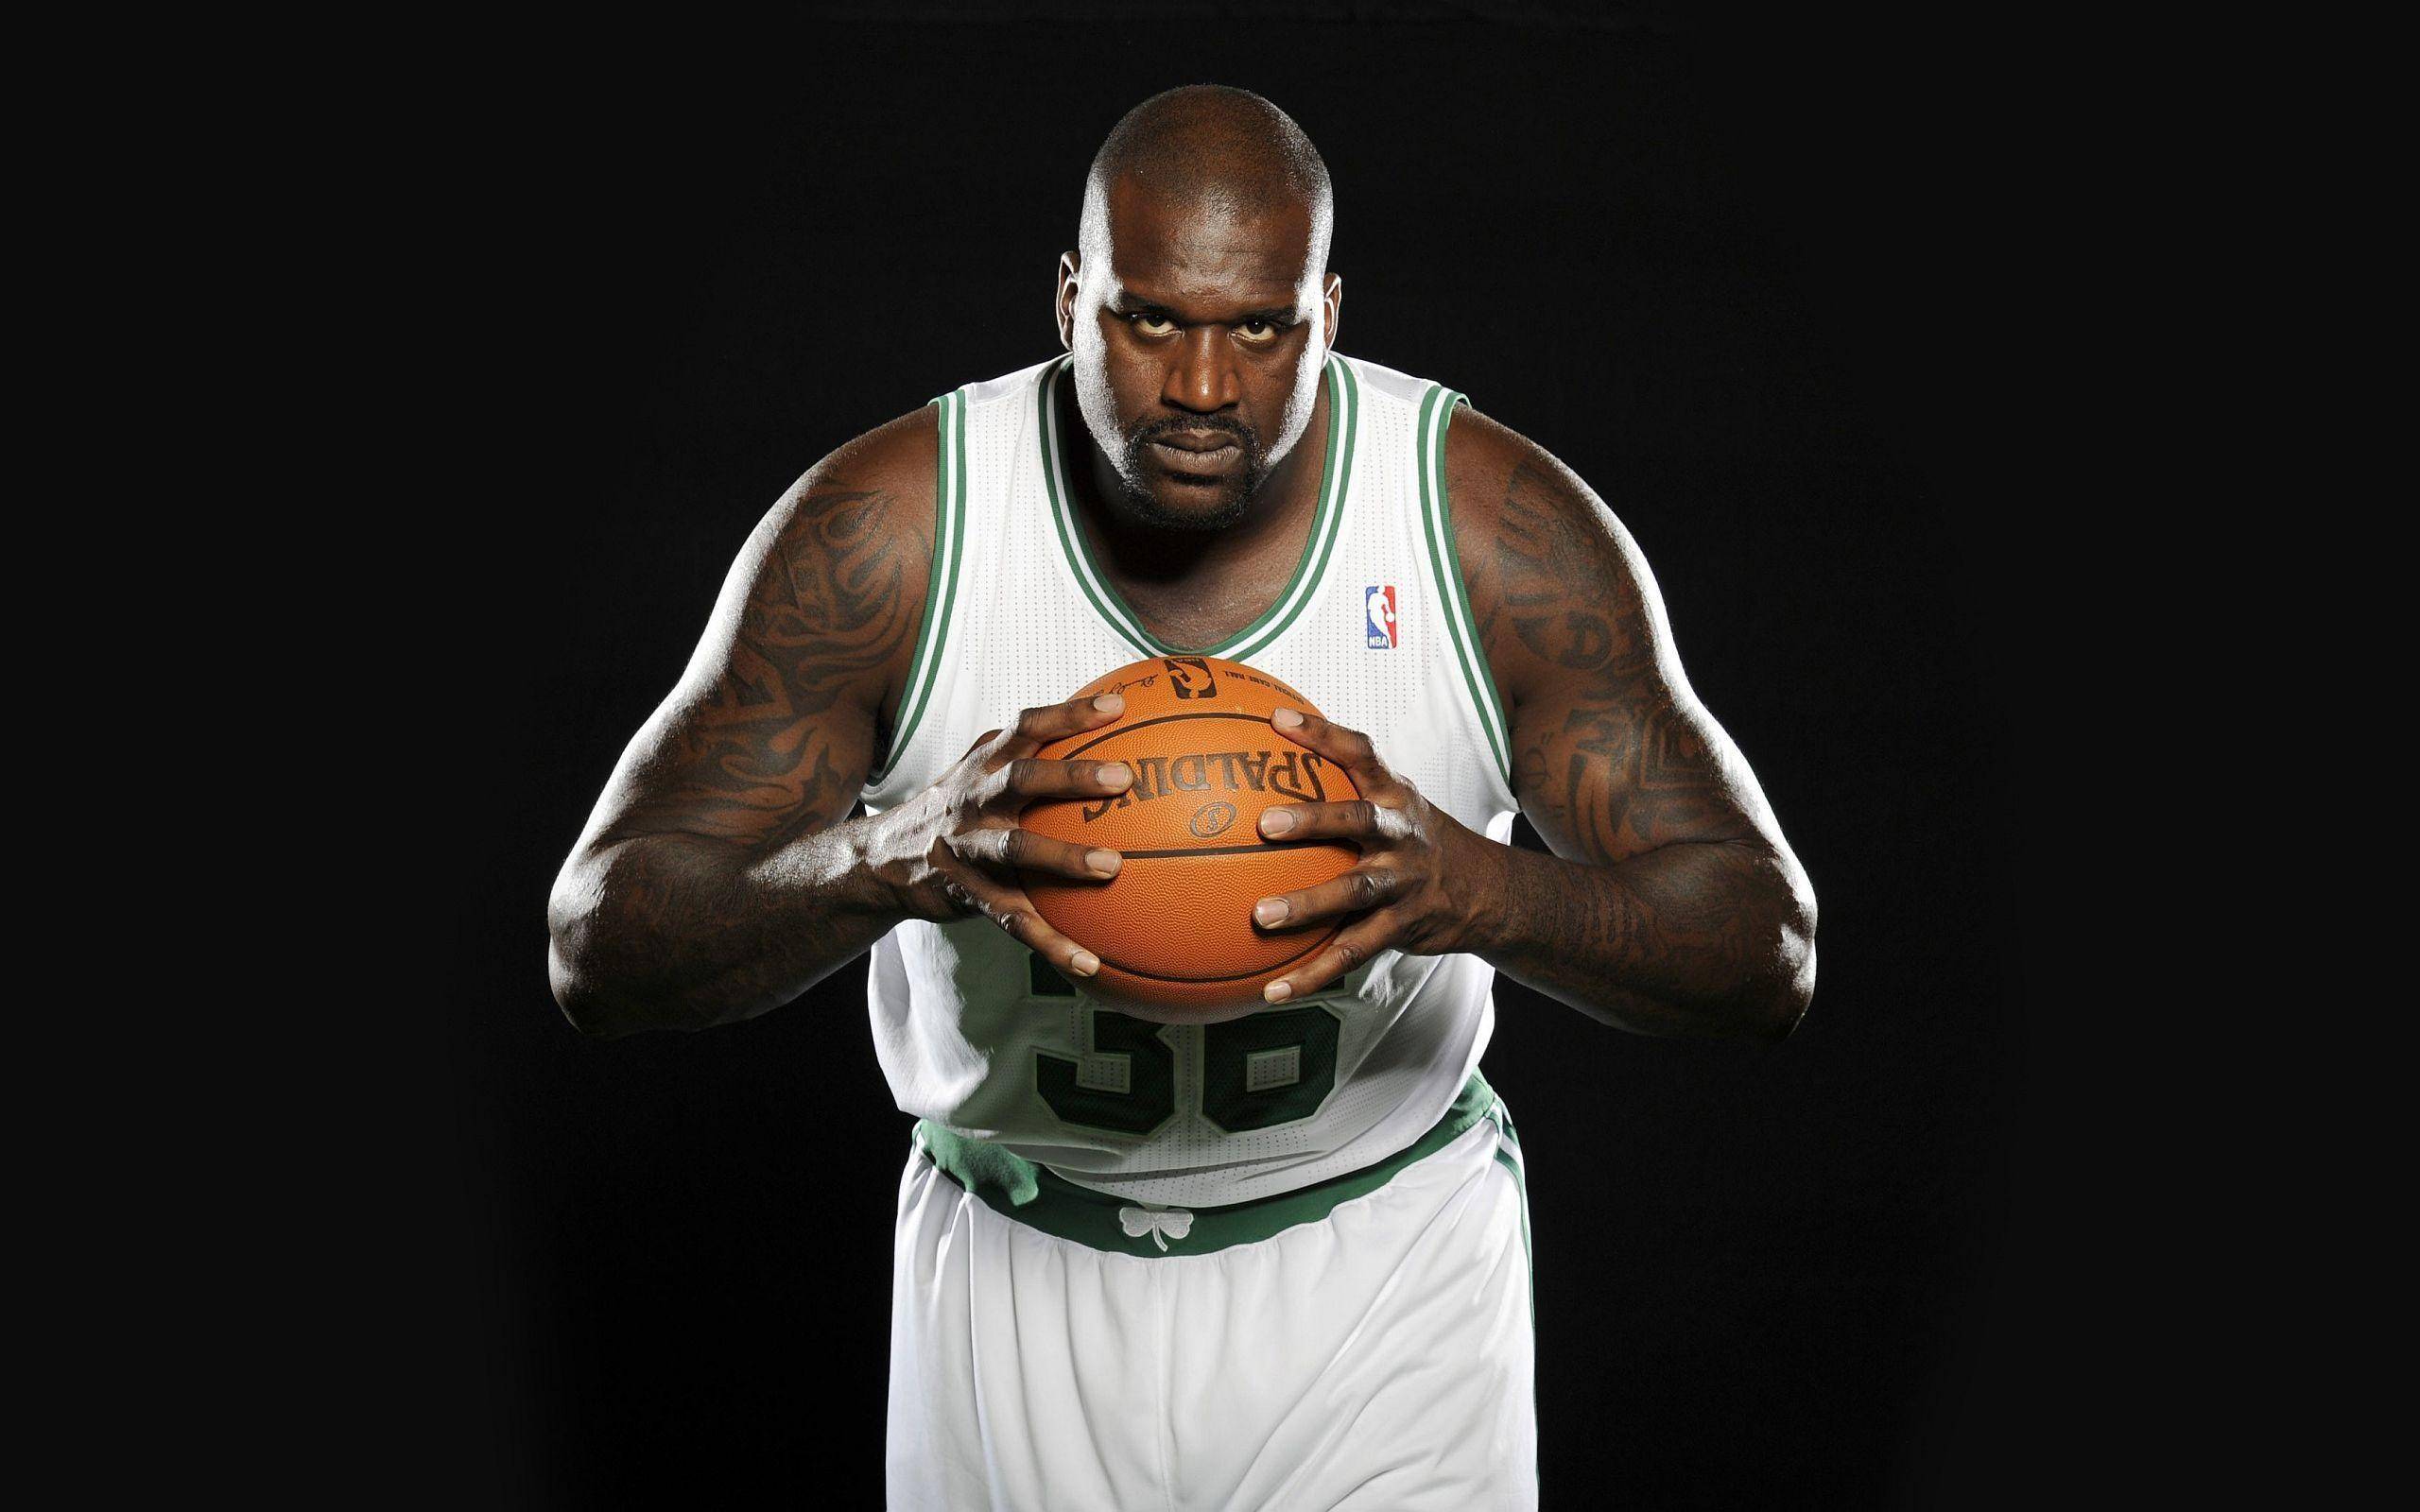 Wallpapers Shaquille o neal basketball ball on the desktop